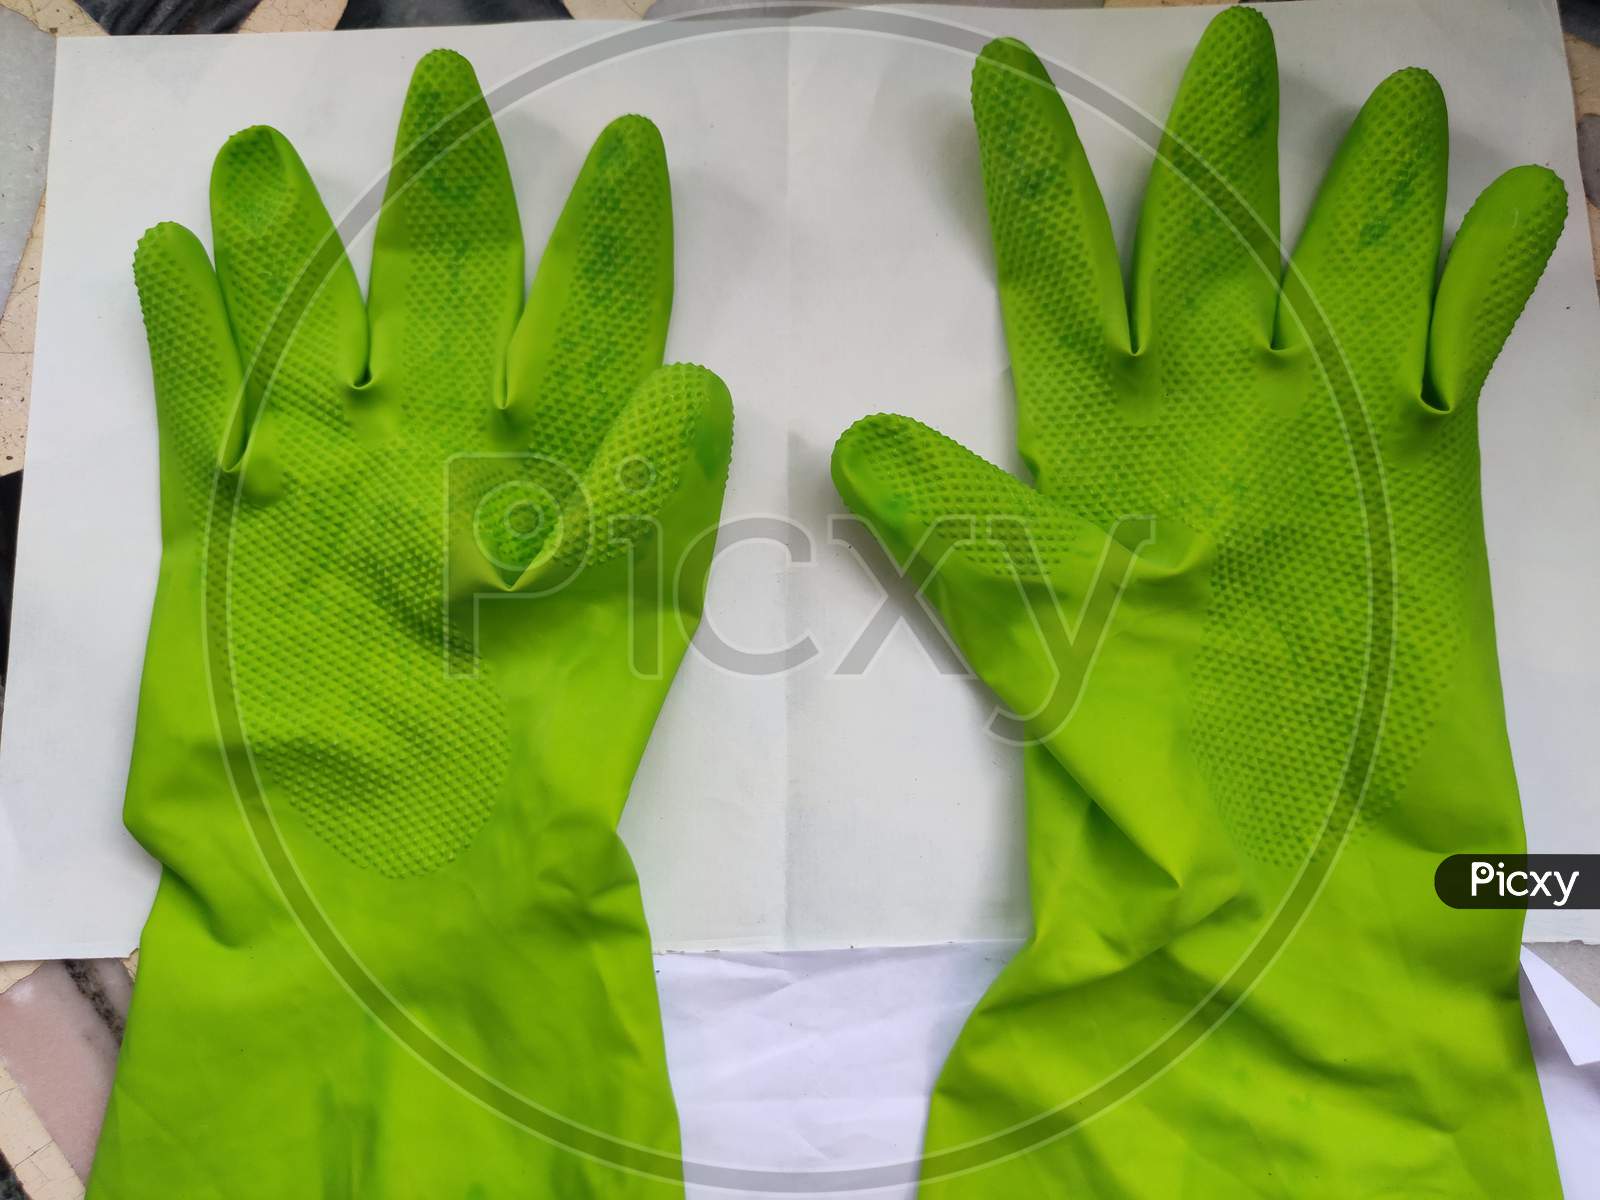 Gloves for protect hand against COVID-19 on blue background